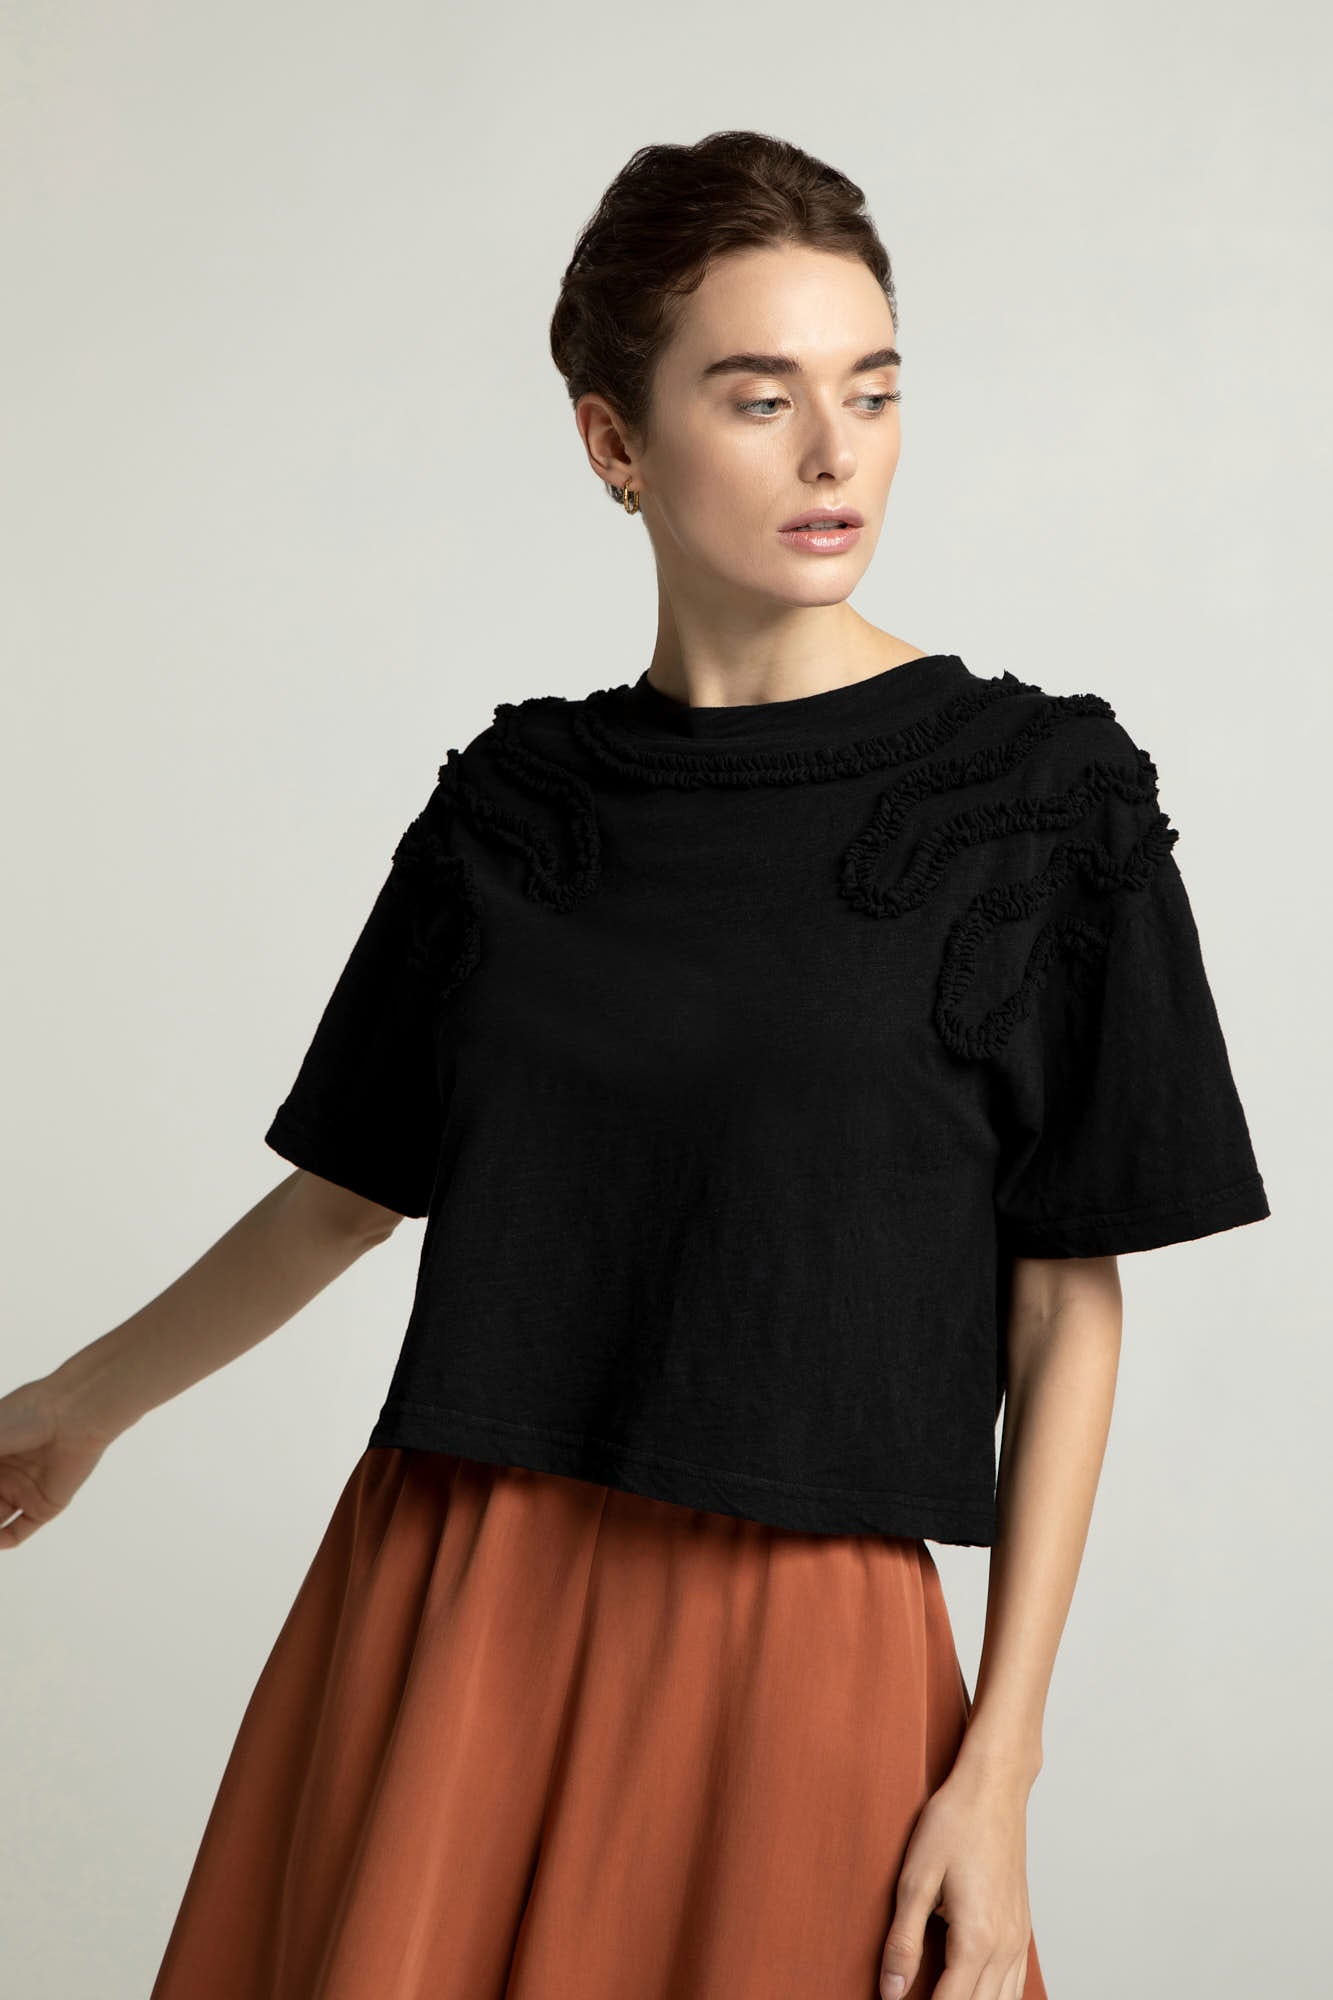 T-shirt MEXINE in black from LOVJOI made of organic cotton